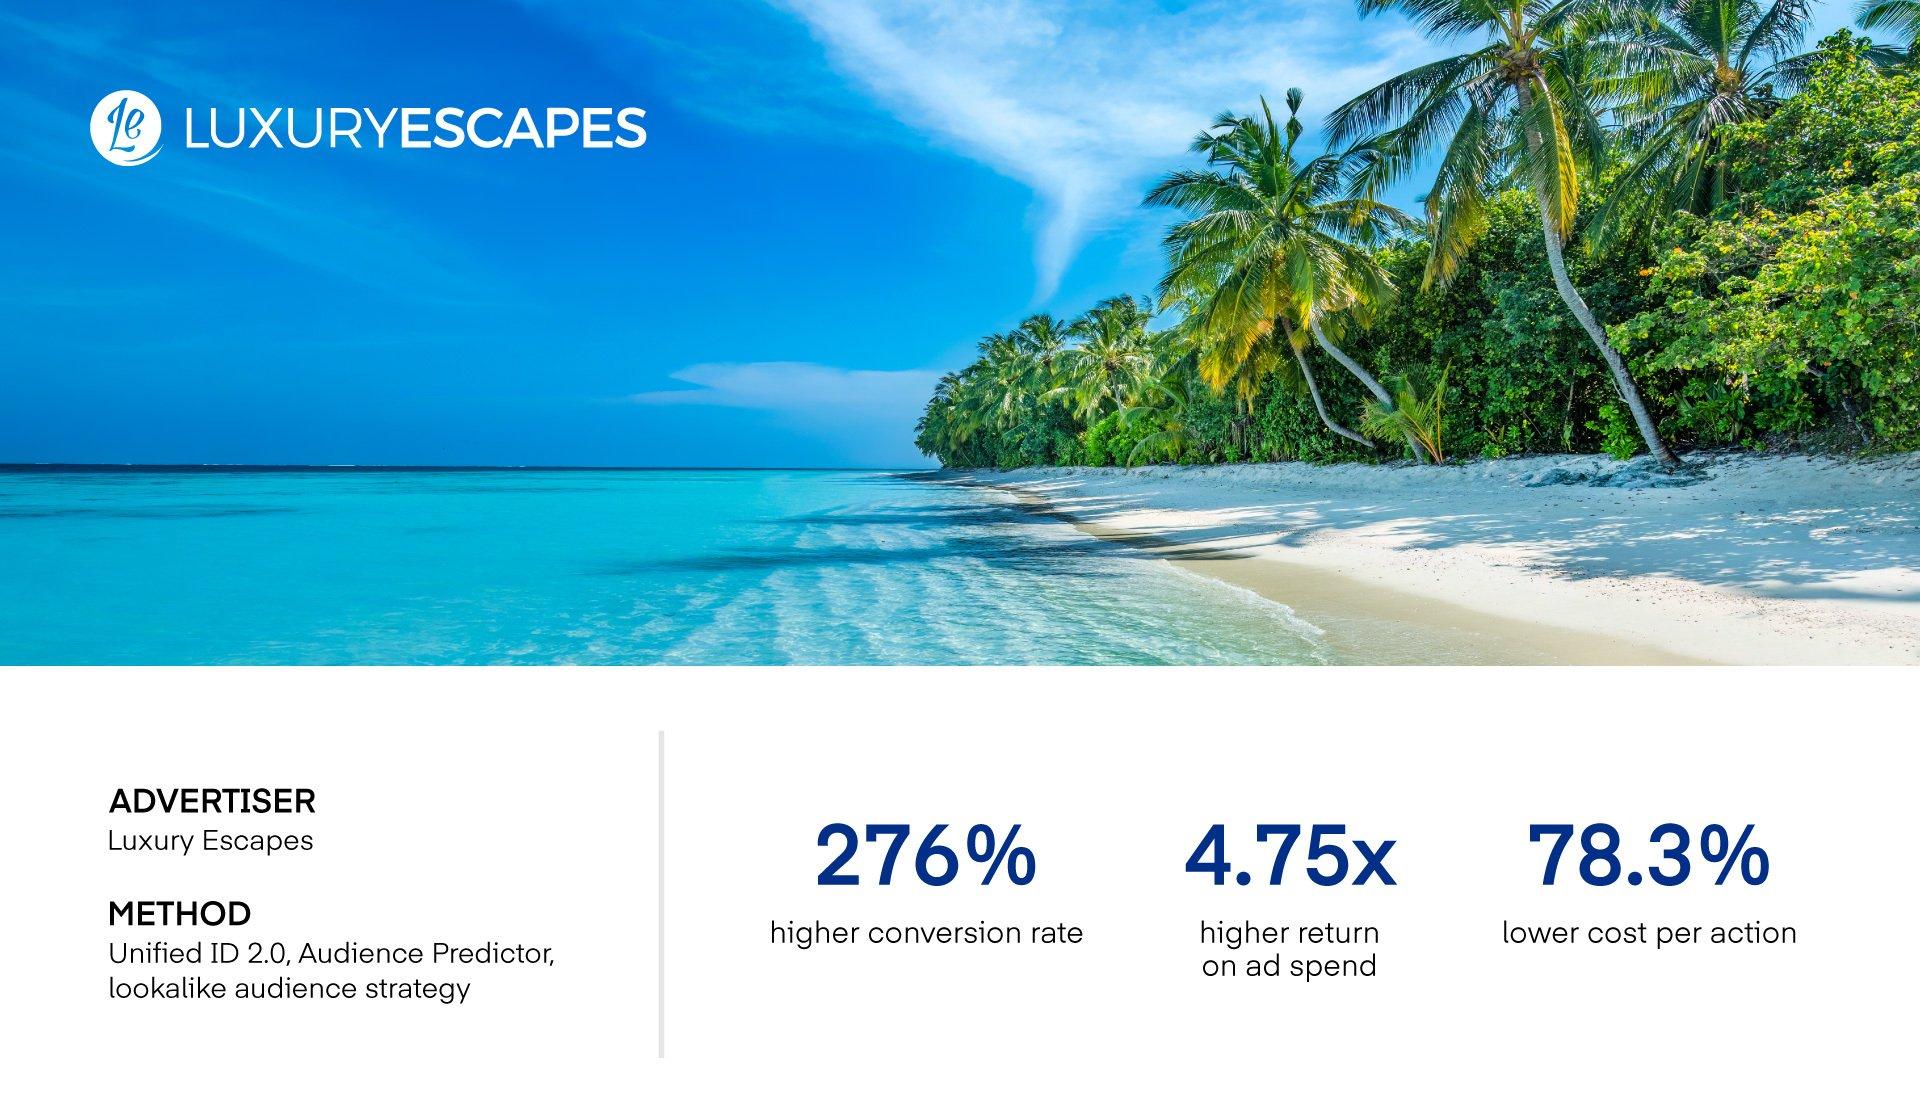 Luxury Escapes and The Trade Desk - Case Study Results: Image of palm trees along an ocean